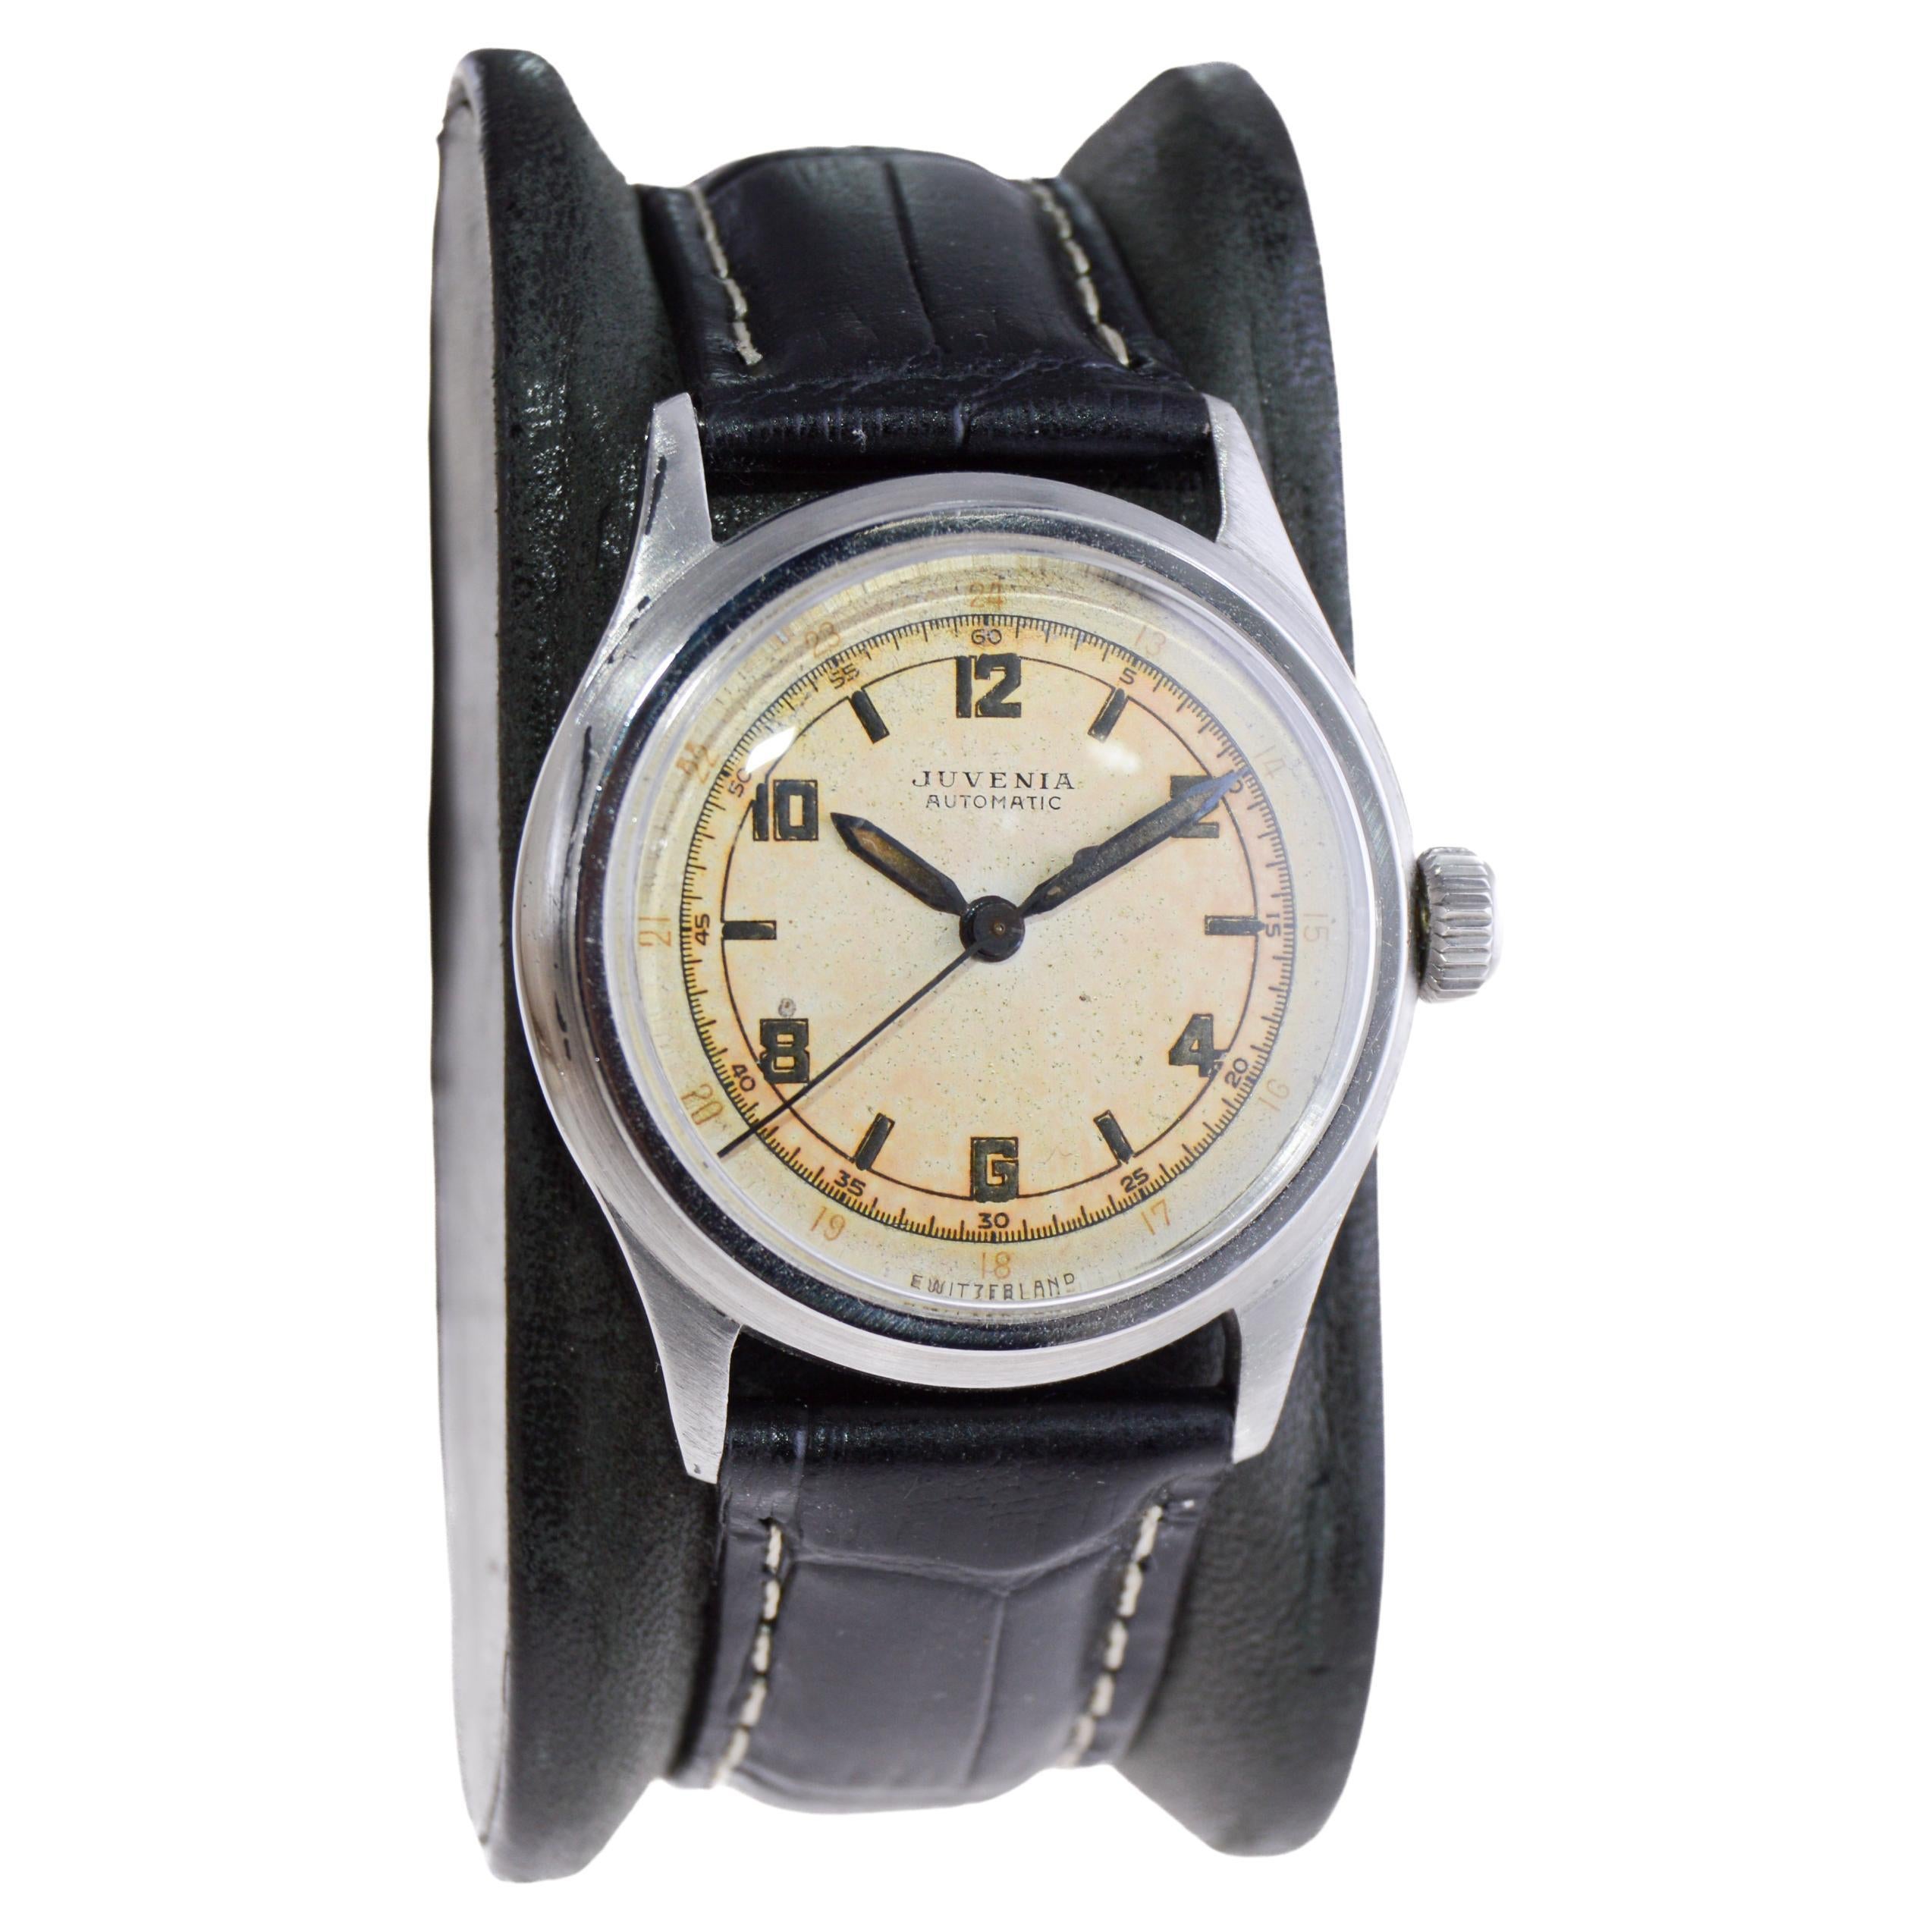 FACTORY / HOUSE: Juvenia Watch Company
STYLE / REFERENCE: Art Deco / Round Automatic 
METAL / MATERIAL: Early Steel
CIRCA / YEAR: 1930's
DIMENSIONS / SIZE: Length 38mm X Diameter 31mm
MOVEMENT / CALIBER: Automatic Winding / 17 Jewels / Bumper Style